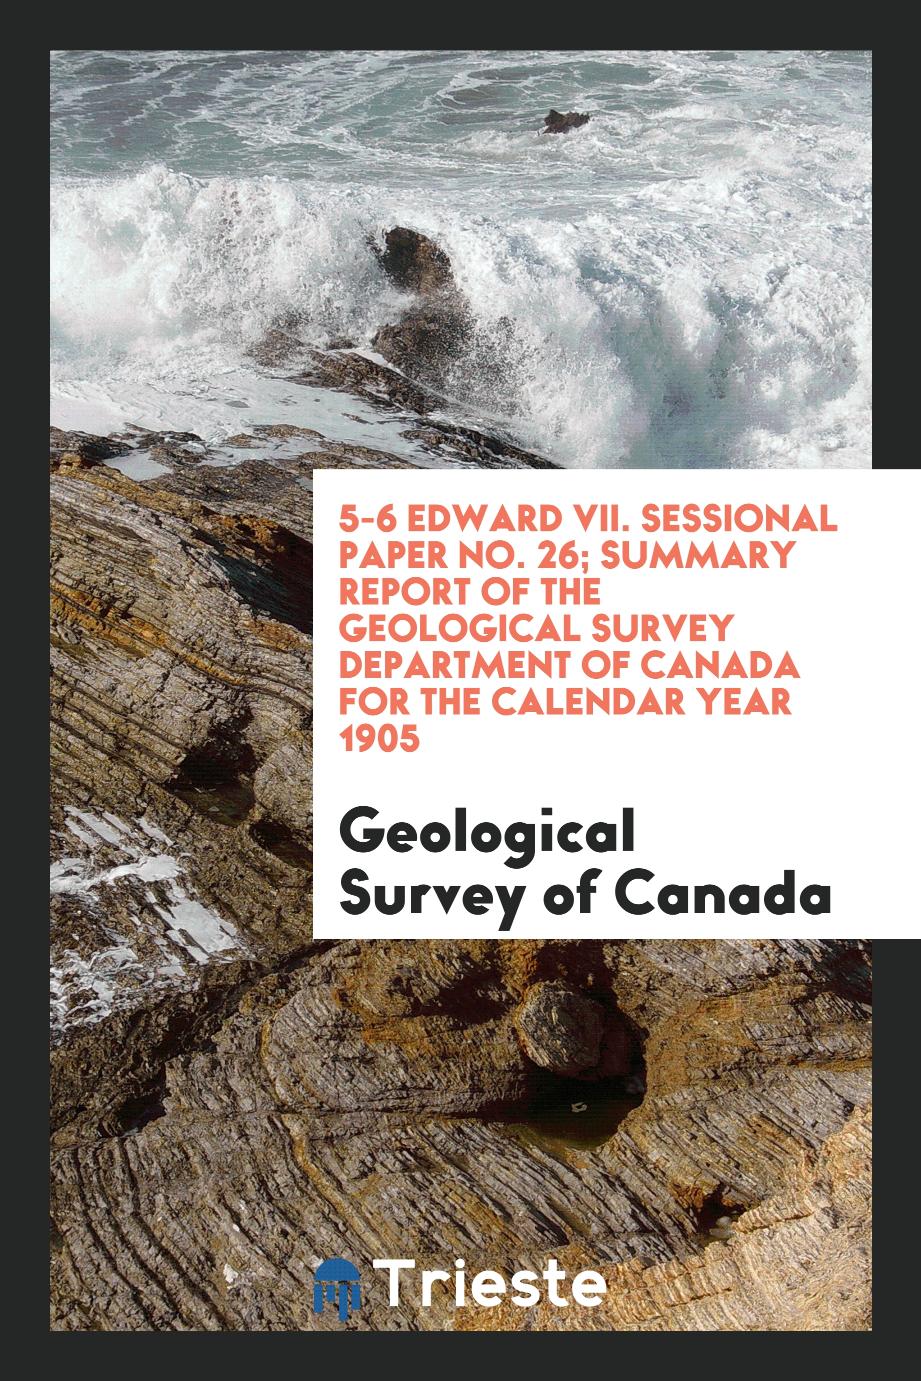 5-6 Edward VII. Sessional Paper No. 26; Summary Report of the Geological Survey Department of Canada for the Calendar Year 1905